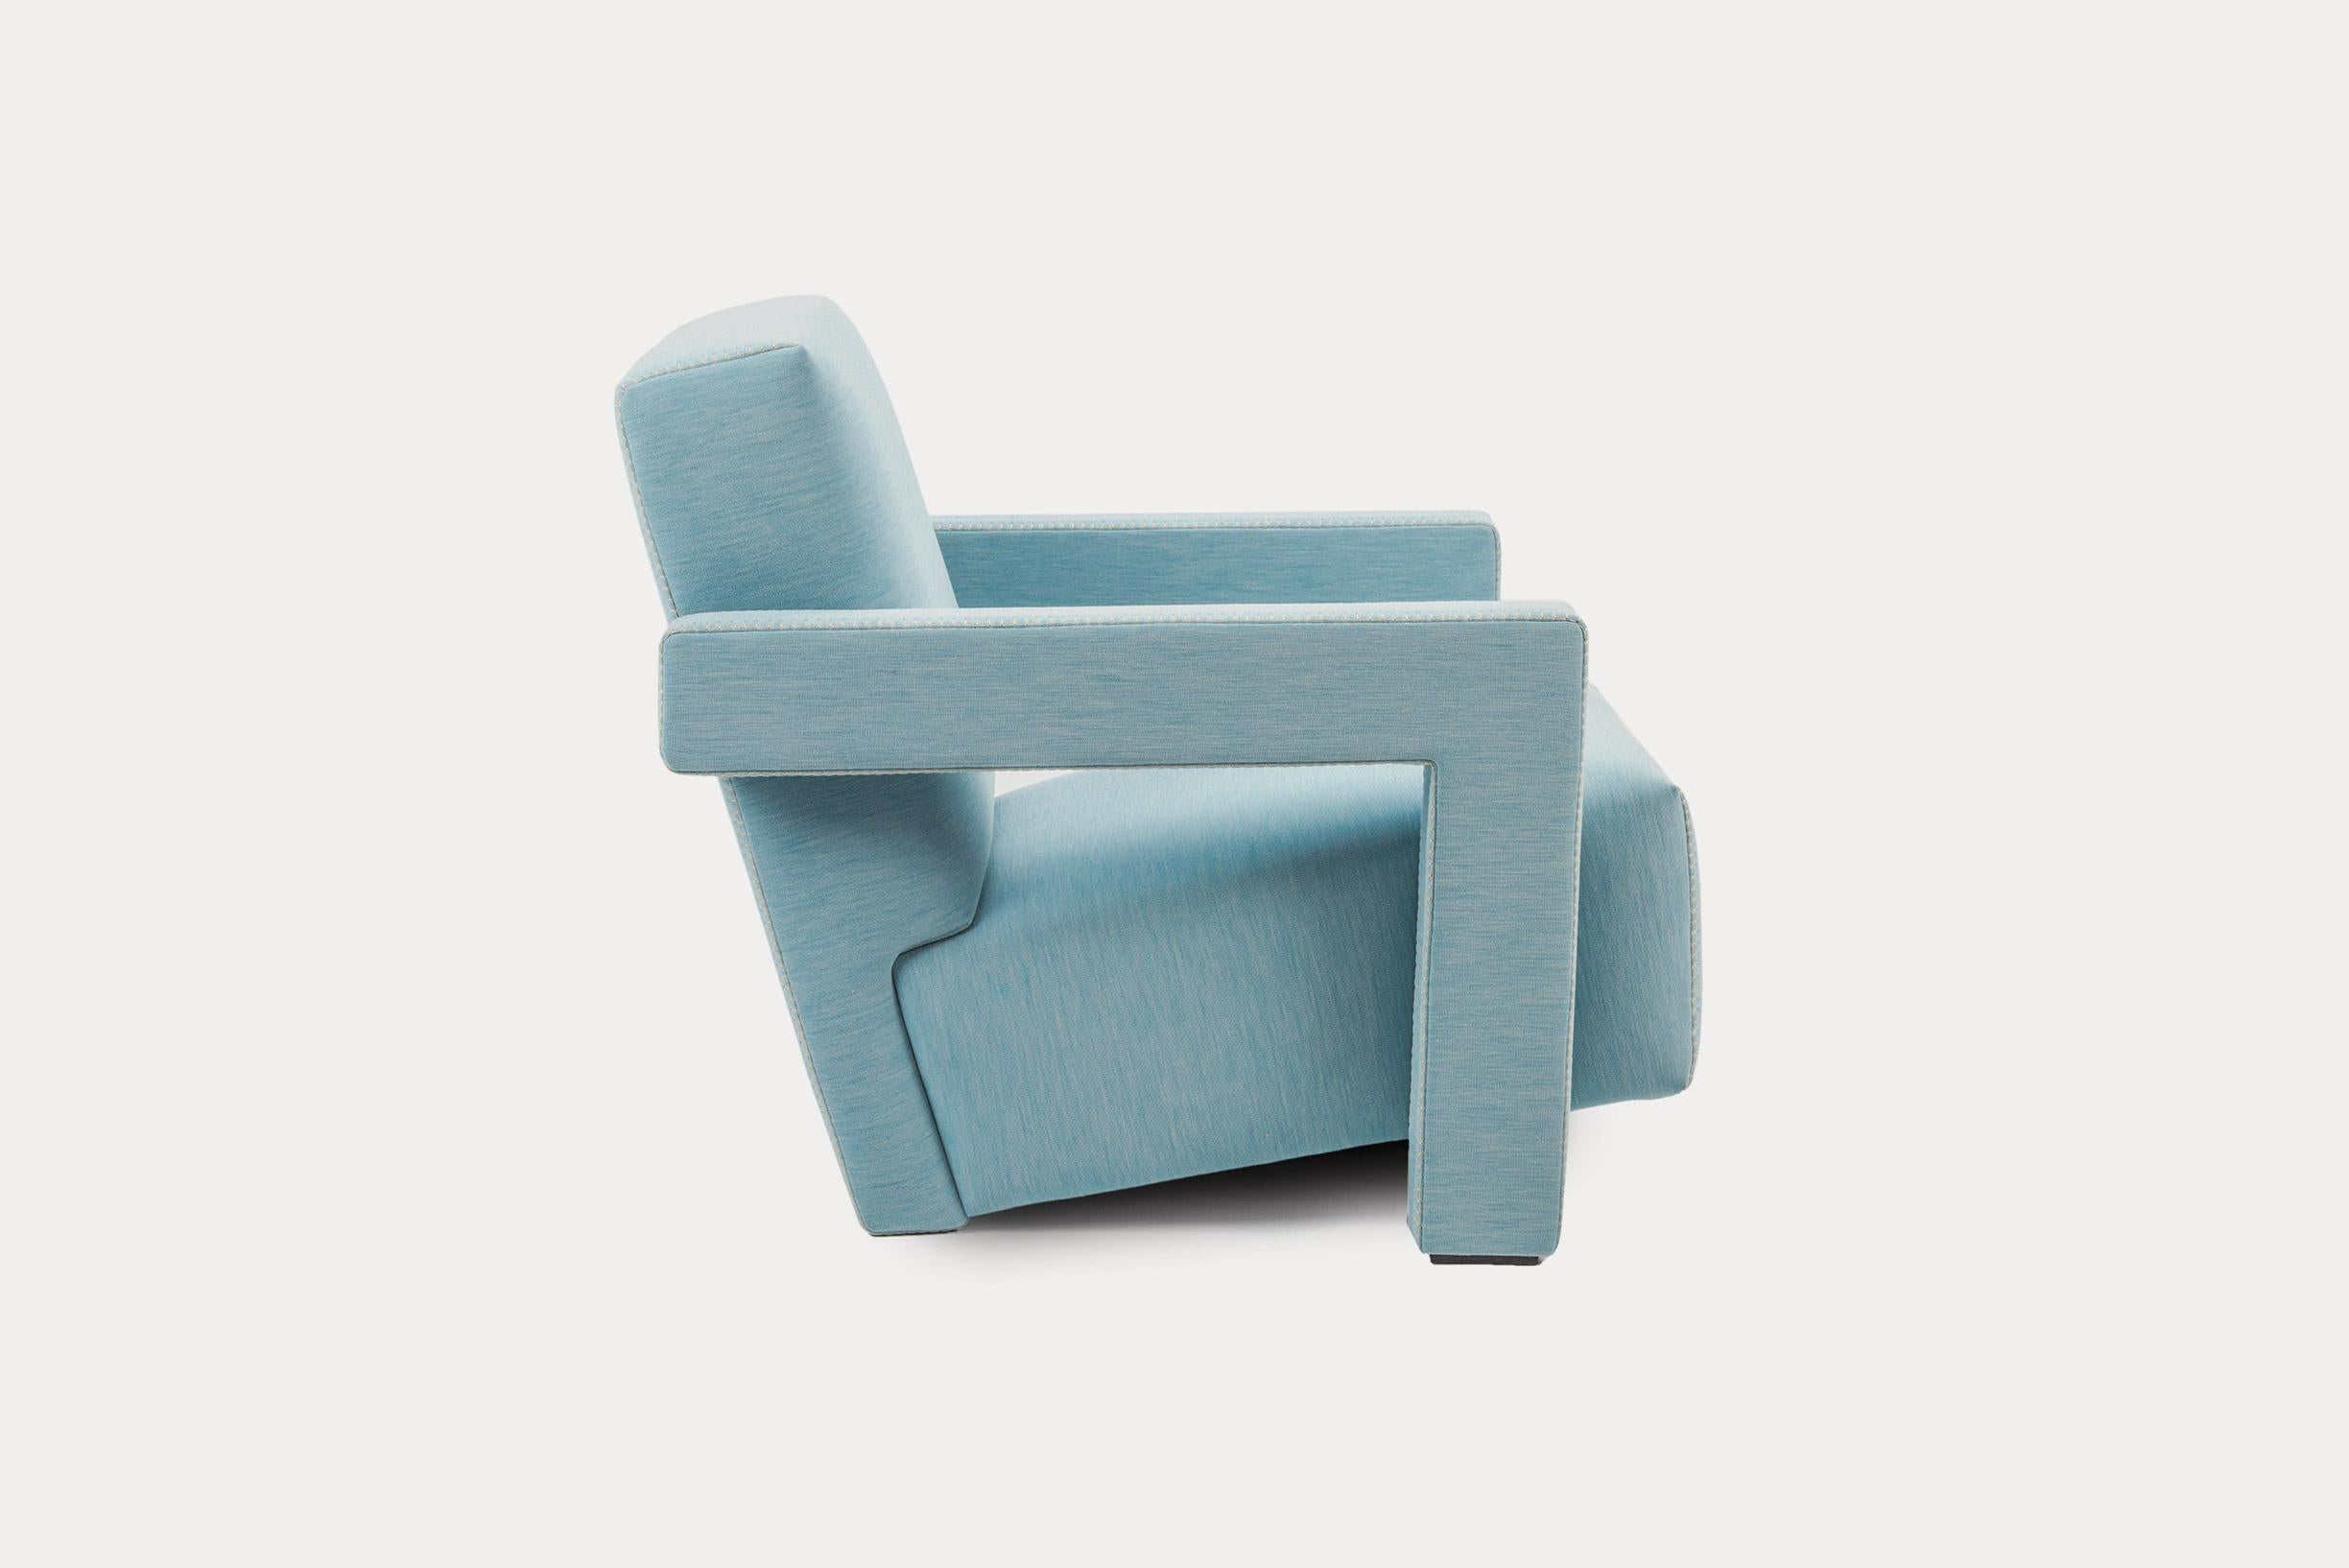 Armchair with main frame, seat and backrest in poplar plywood and fir solid wood. Massive poplar wood armrests. Polyurethane foam and polyester padding. Soft light blue non-removable fabric with blanket fine stitching in natural colour. Feet in